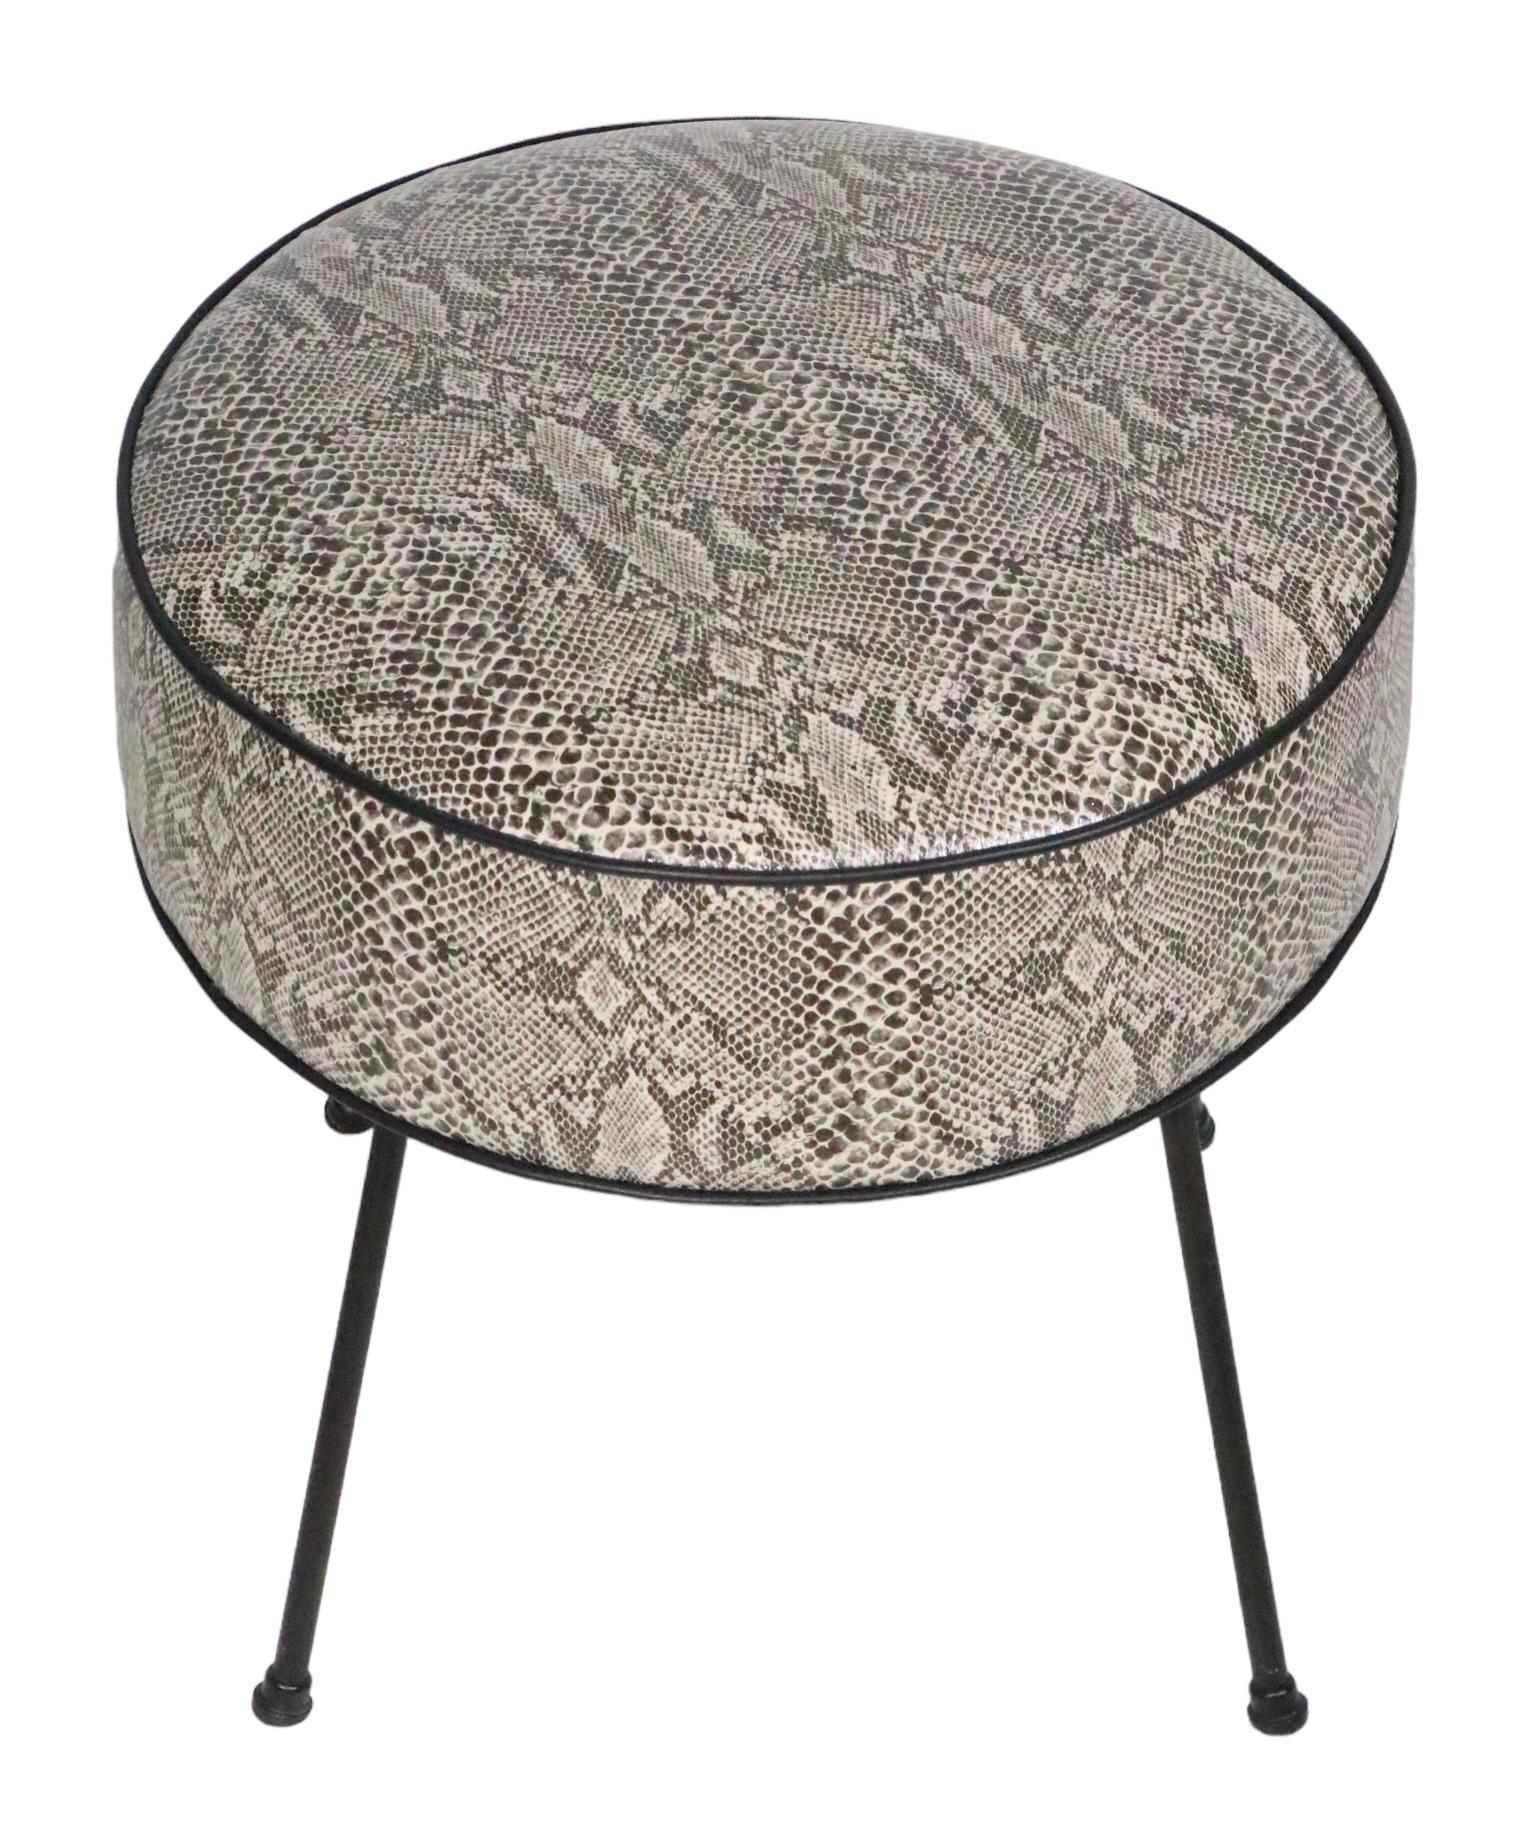 Upholstery Mid Century Foot Stool Pouf Ottoman Reupholstered in Black and White Faux Python